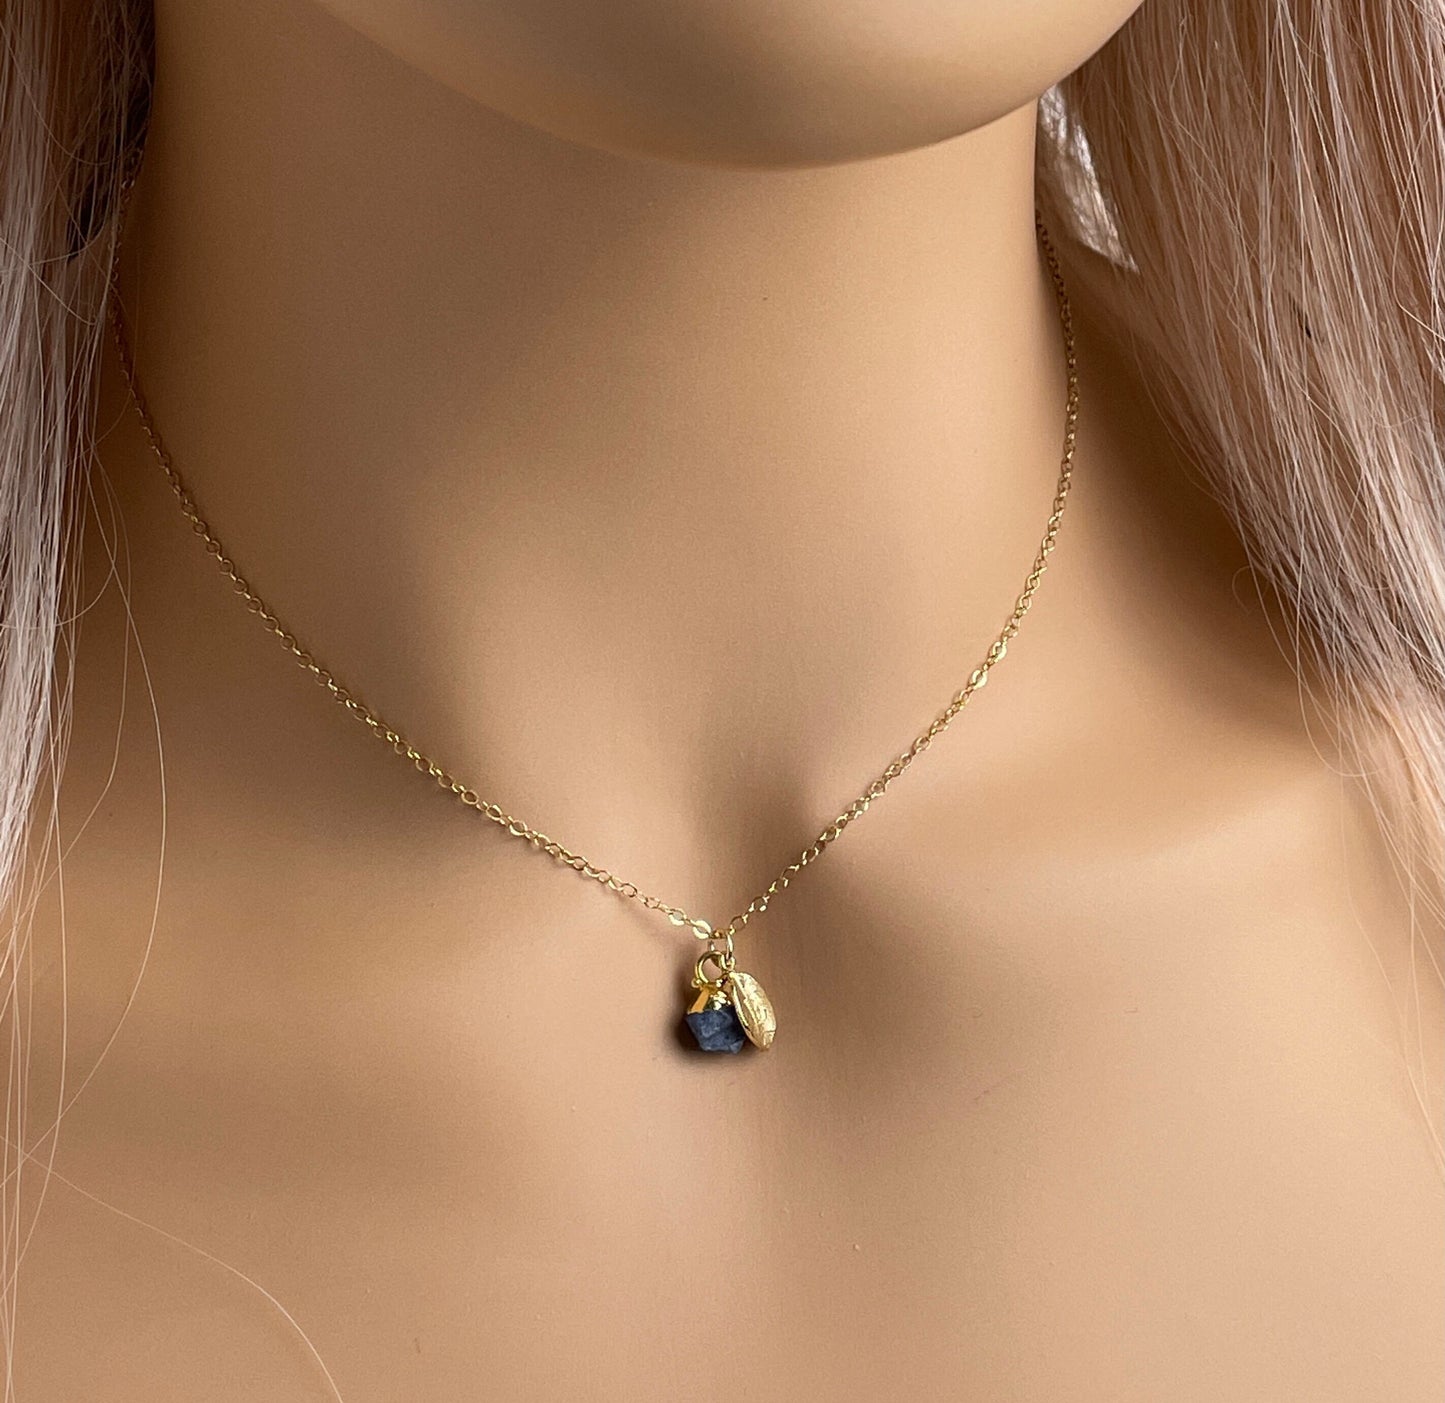 Tiny Sapphire Necklace Gold, Personalized Raw Sapphire Pendant, Navy Blue Crystals, September Borthday Gift For Best Friend, M5-610